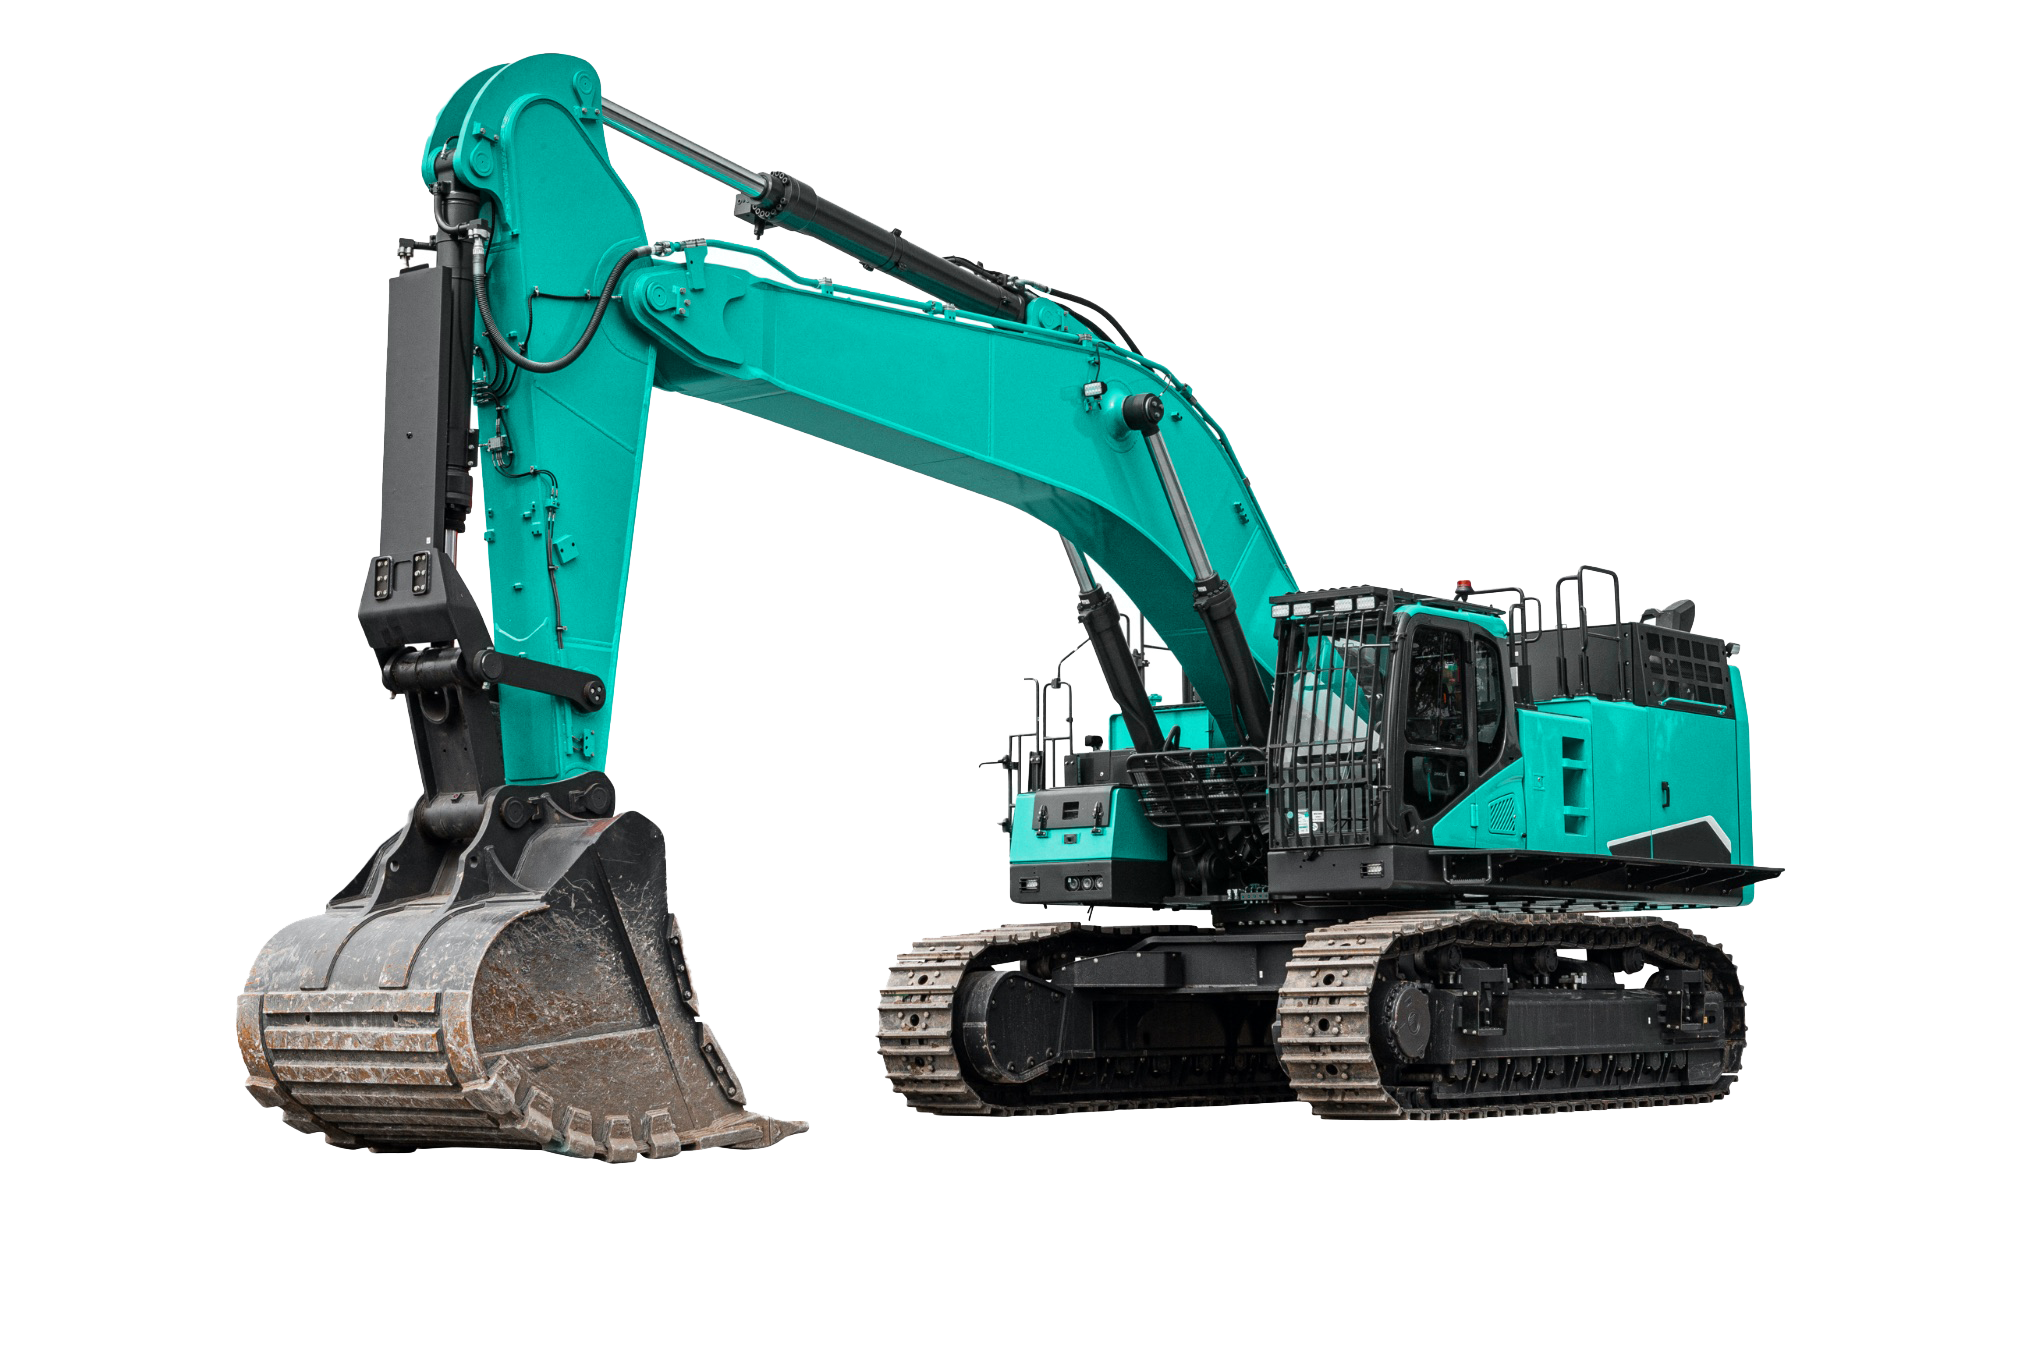 14 Tonne Excavator with Reduced Tail Swing